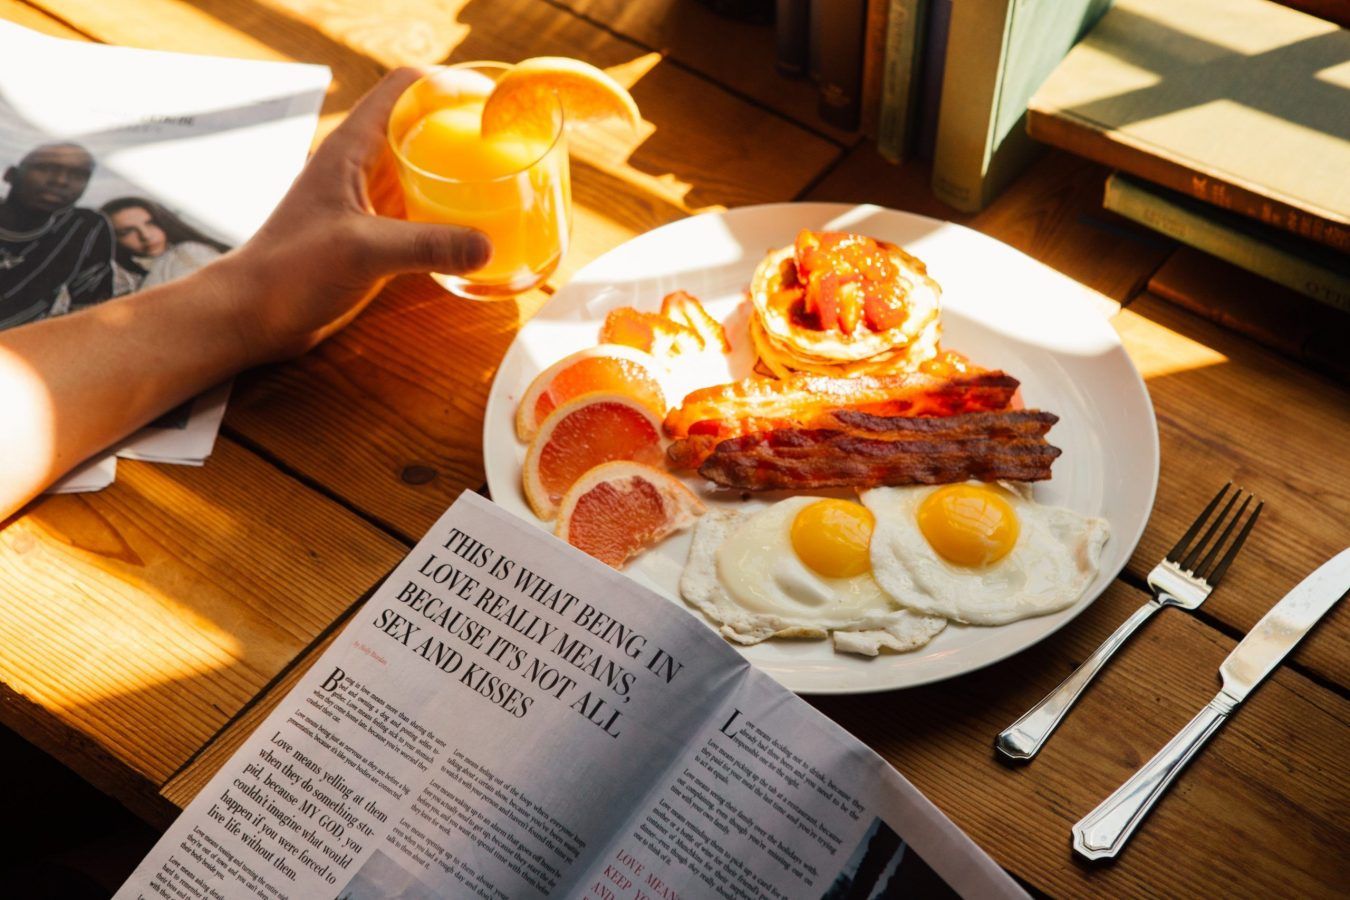 This is the best time to eat breakfast for weight loss, according to science